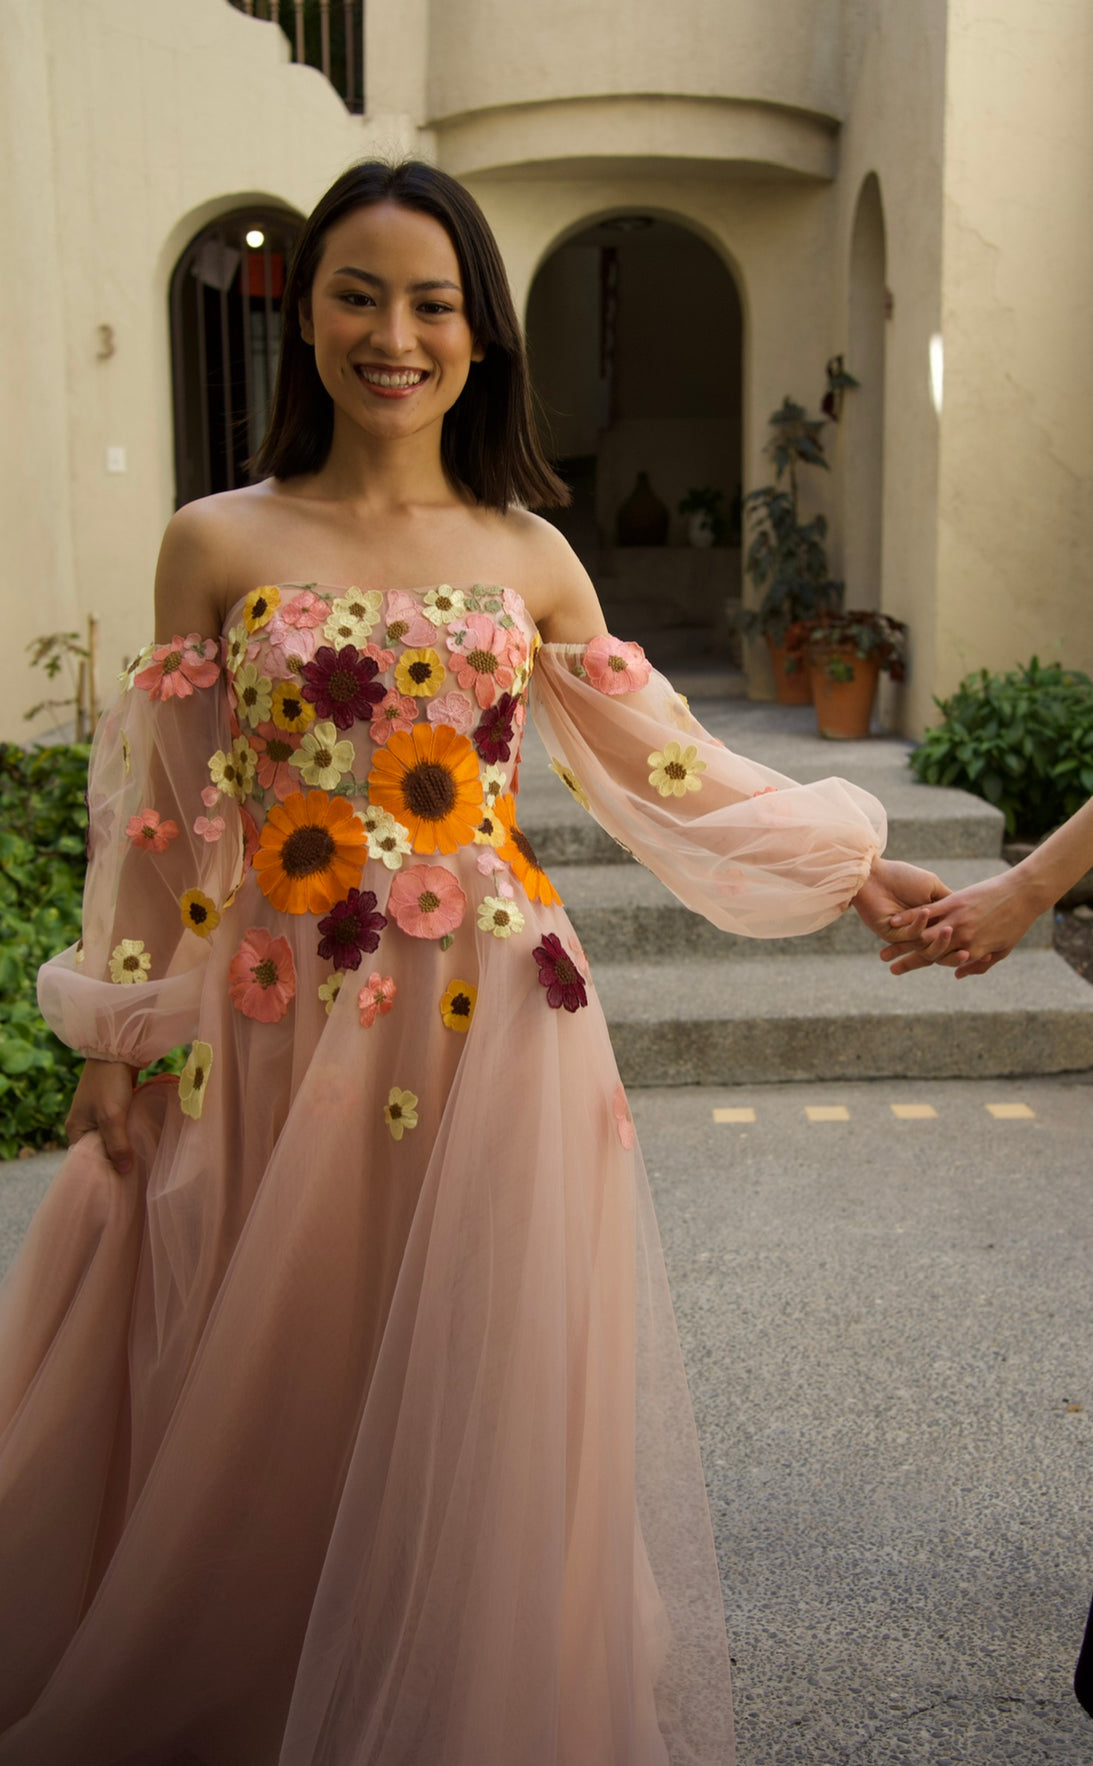 Florals Ballgown in Sweet Pink with Puffy Sleeves